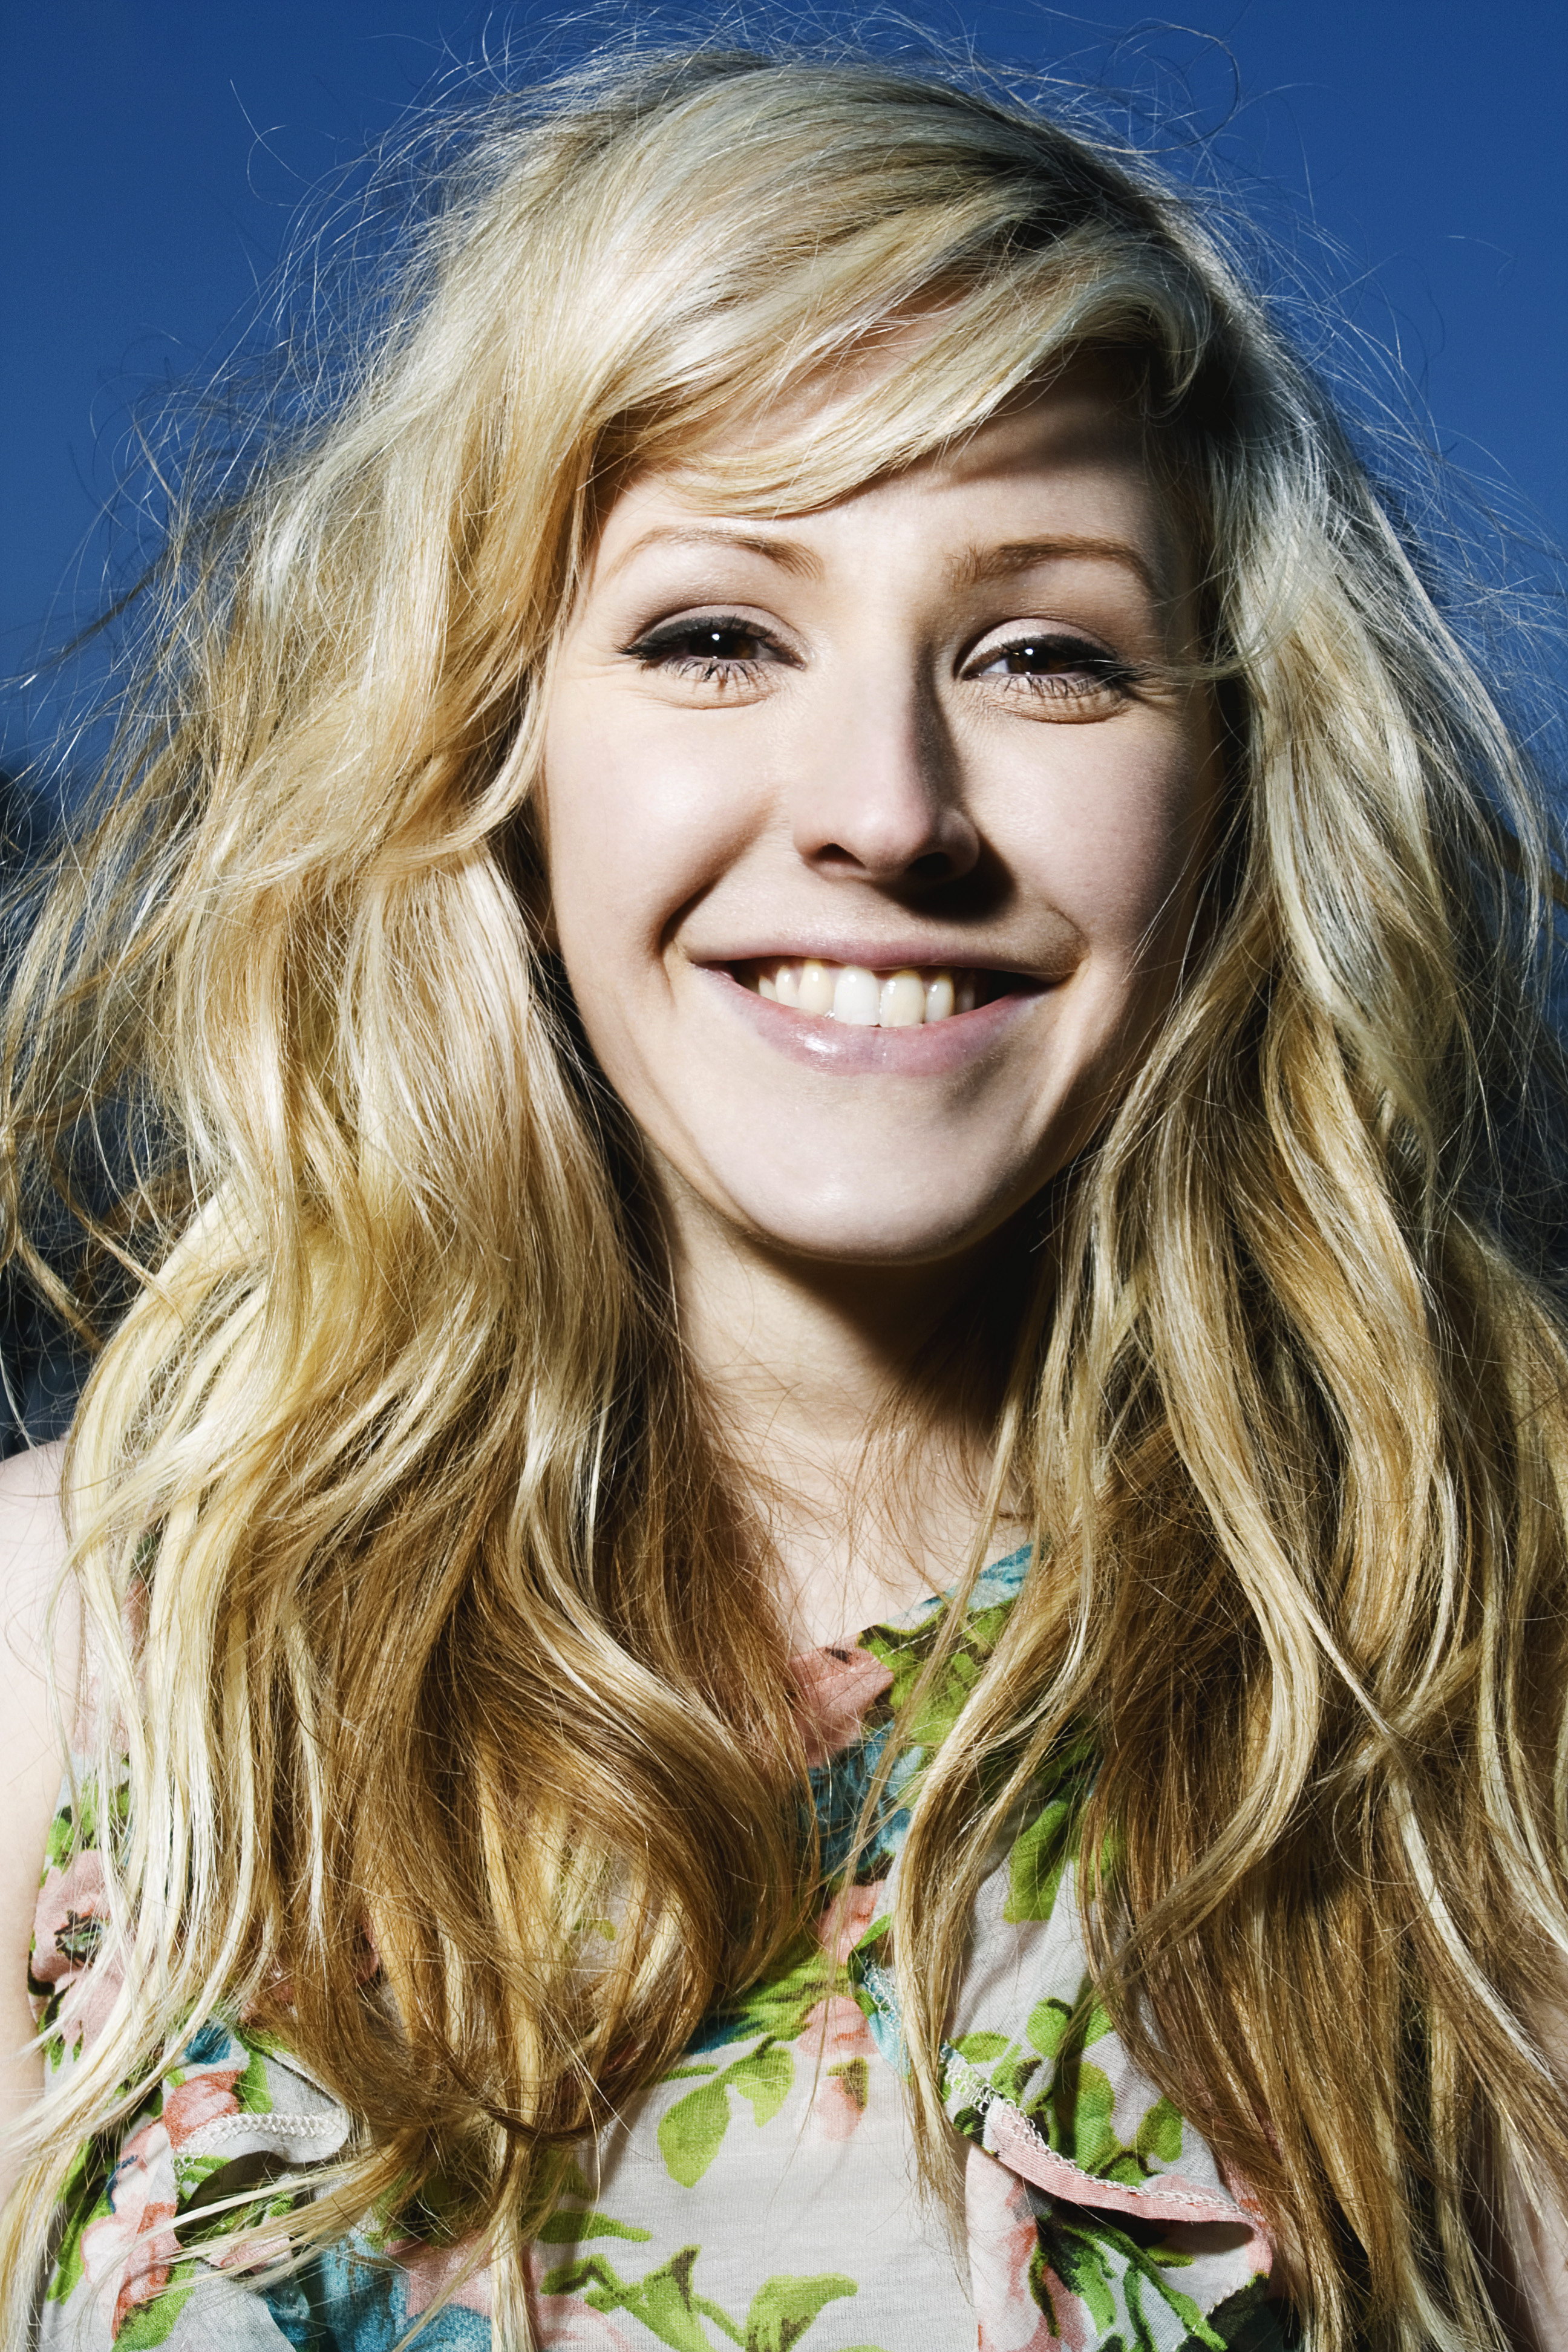 Ellie Goulding photo 21 of 407 pics, wallpaper - photo #655980 - ThePlace2